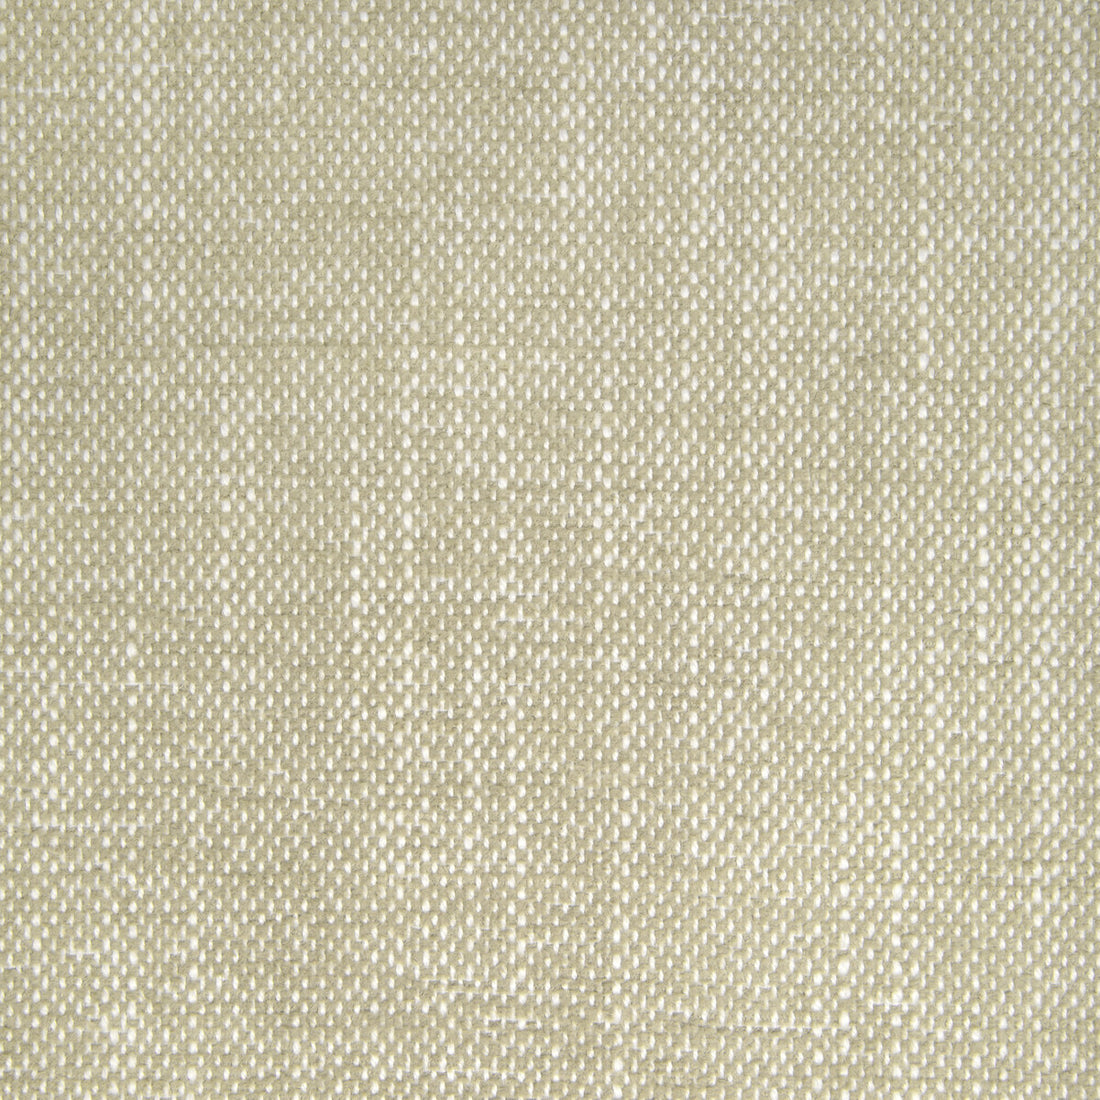 Kravet Smart-36885 fabric in 16 color - pattern 36885.16.0 - by Kravet Smart in the Inside Out Performance Fabrics collection